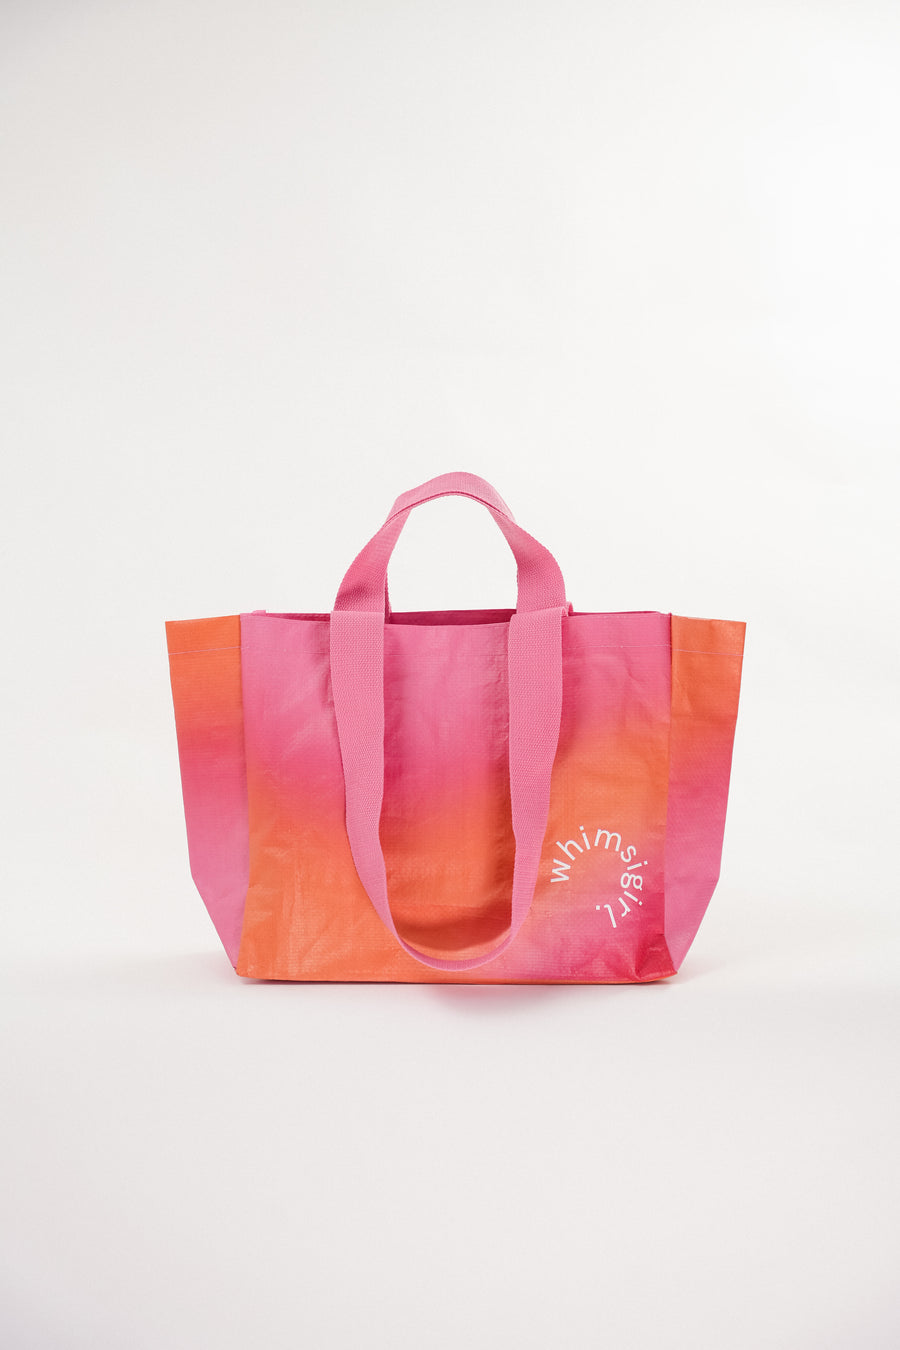 Pick-Me-Up Tote in Sunset Heat